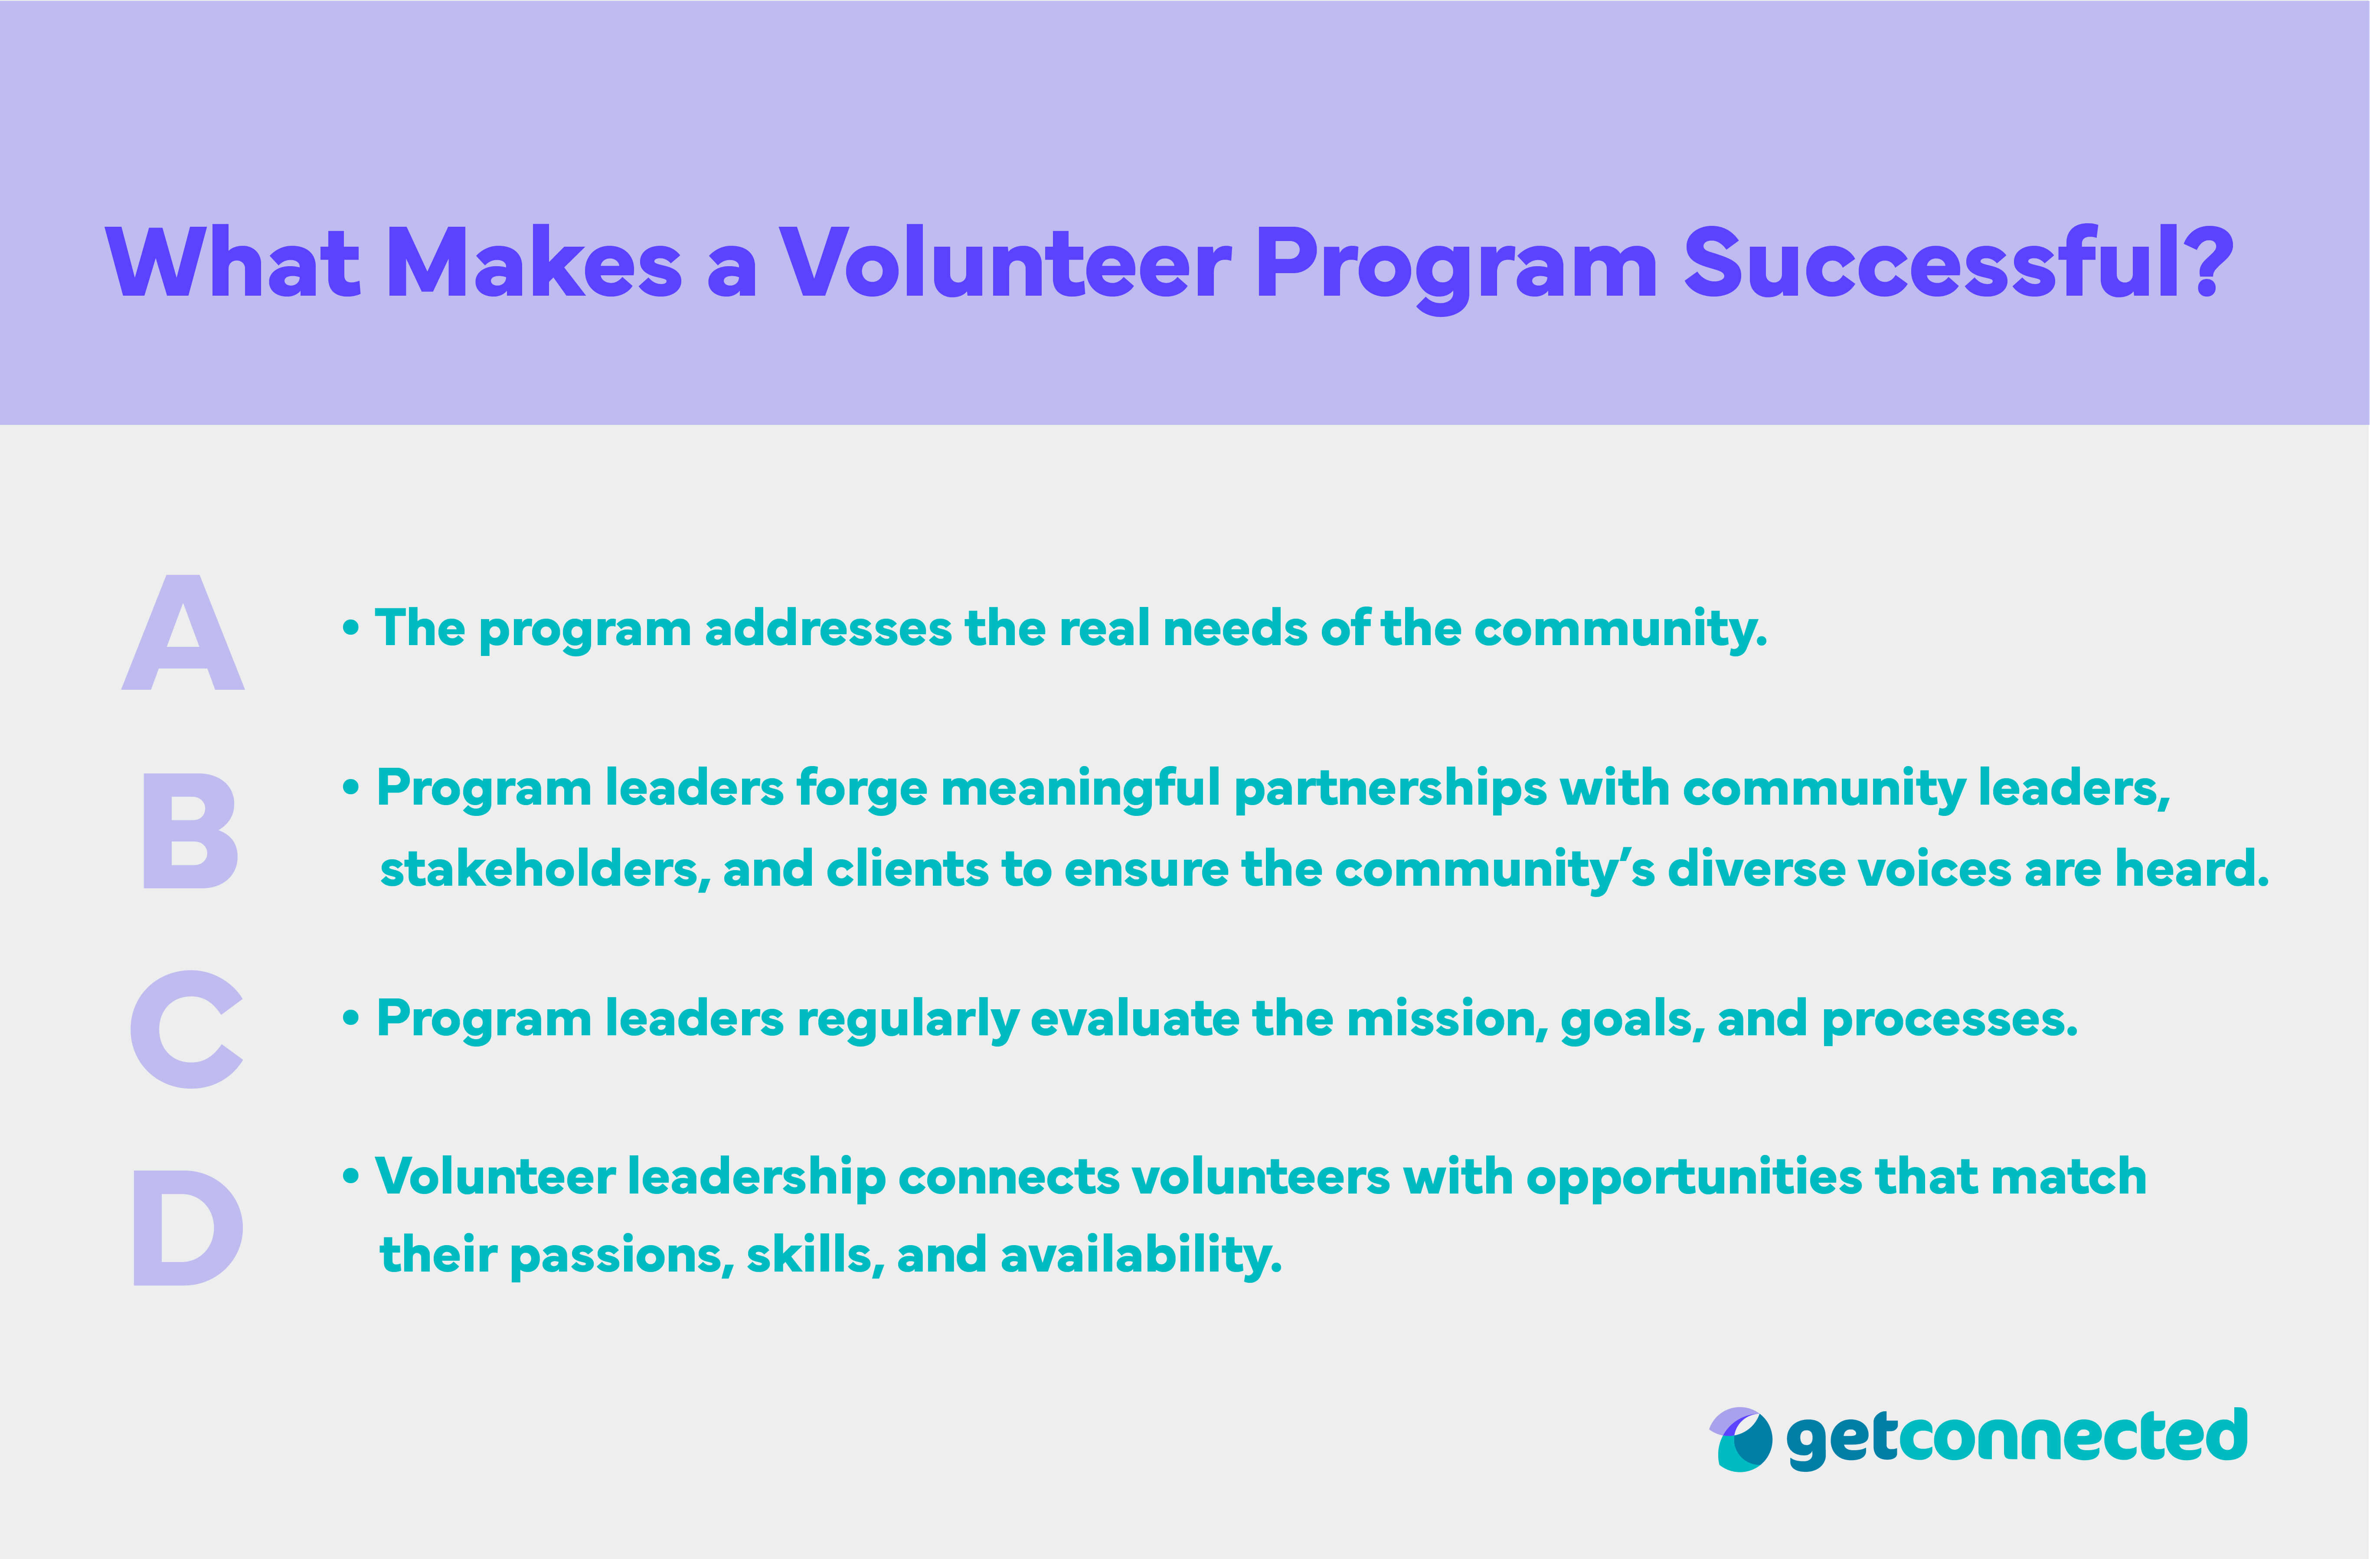 How to start a volunteer program and what makes a volunteer program successfull